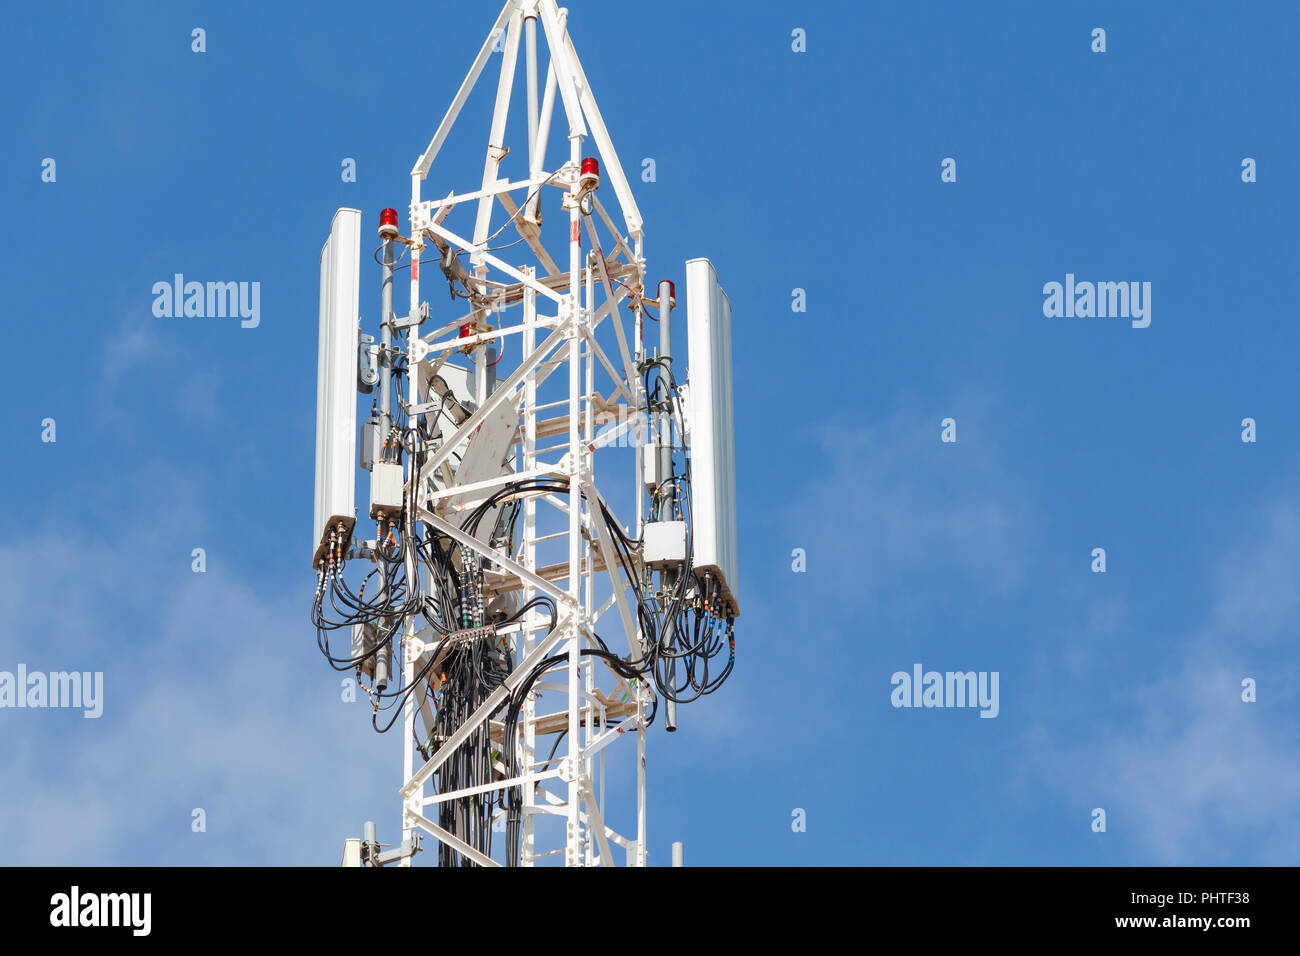 Telecommunications tower against blue sky, with mobile antennas Stock Photo